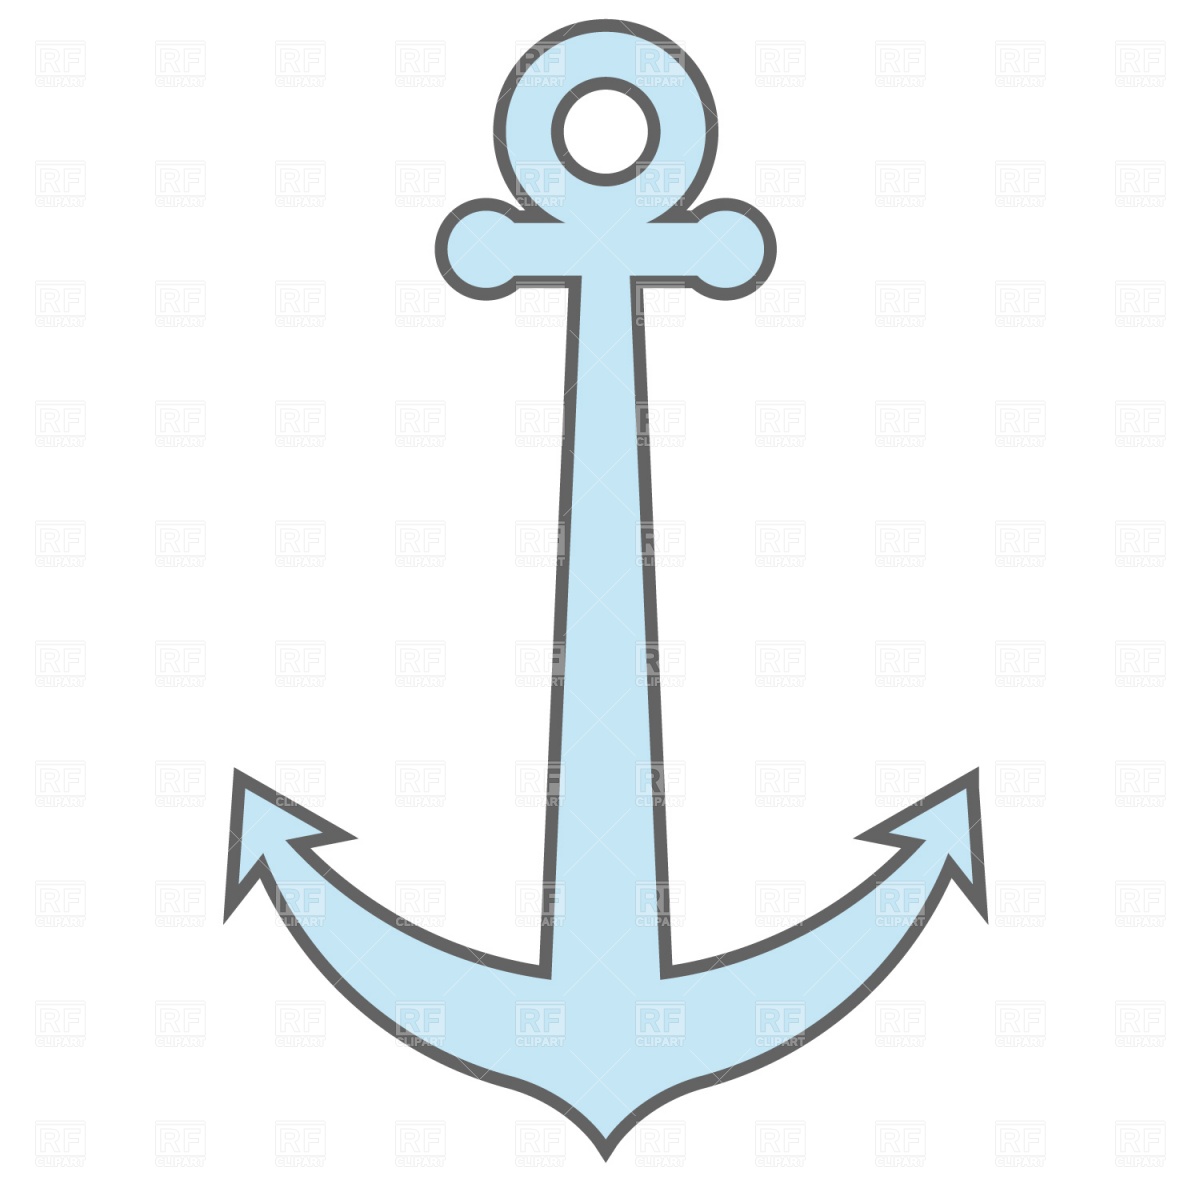 free clipart images of anchors - photo #25